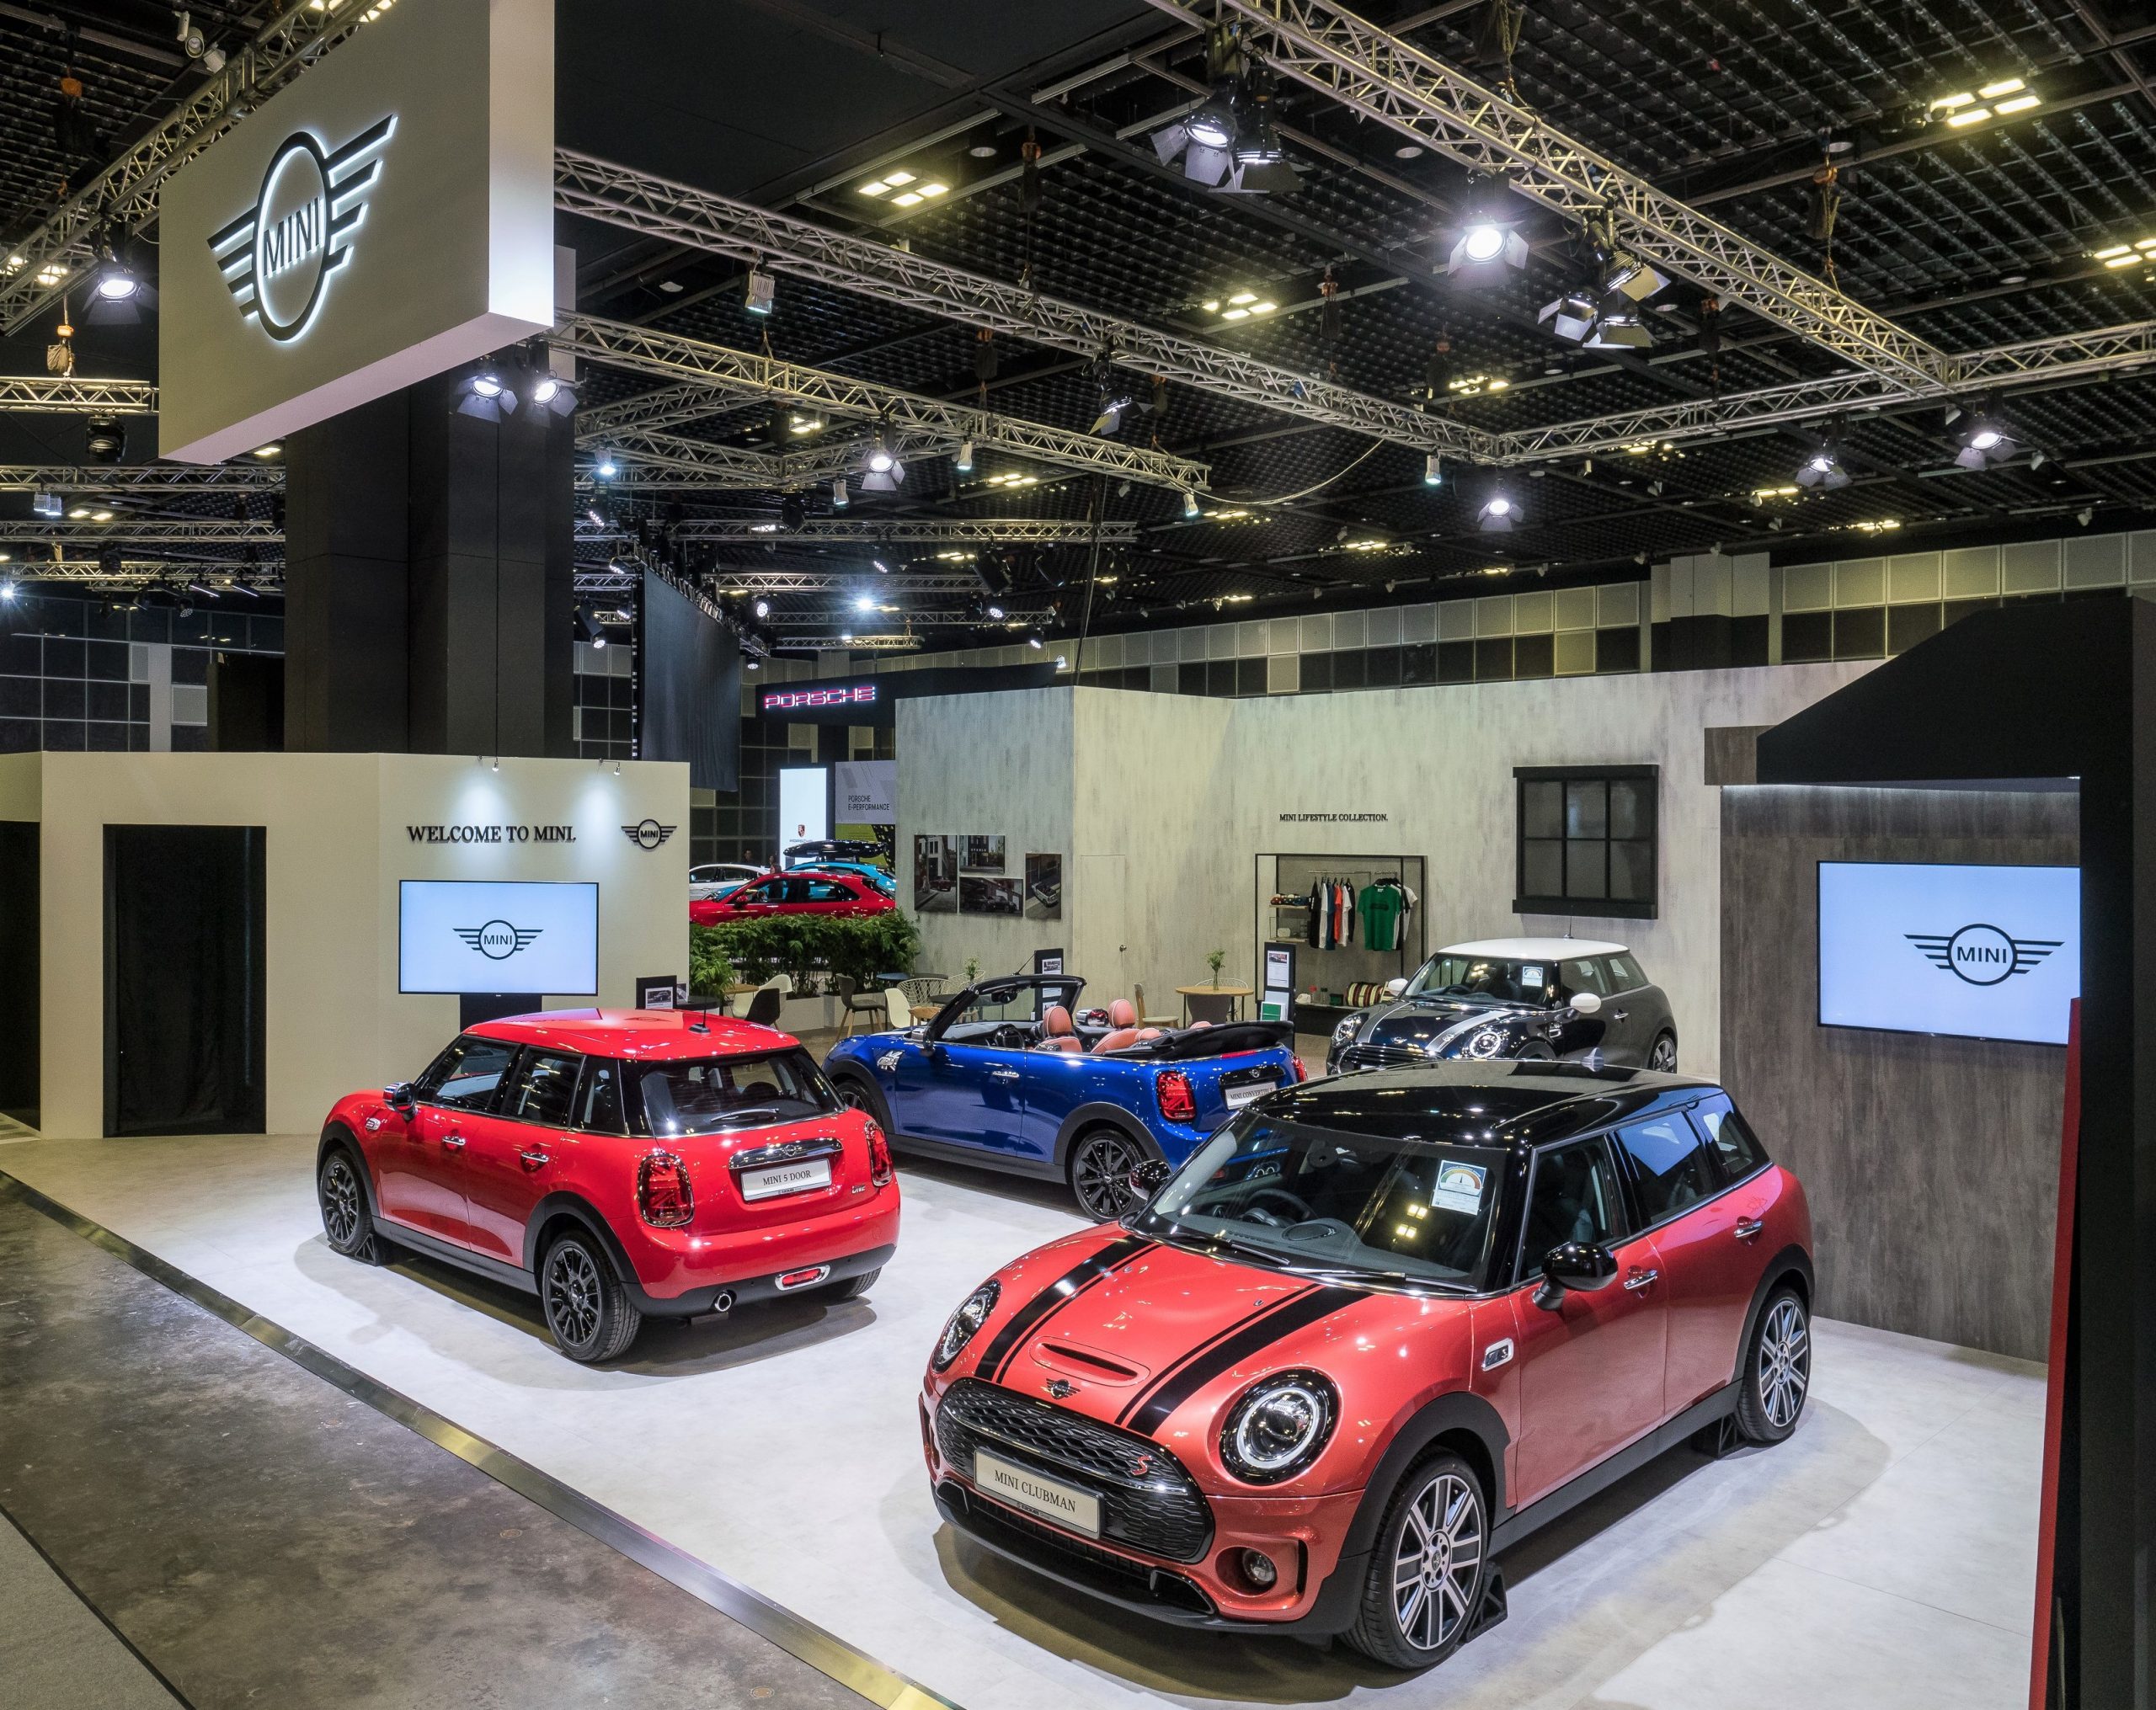 The MINI lineup on display at the Singapore Motorshow 2020